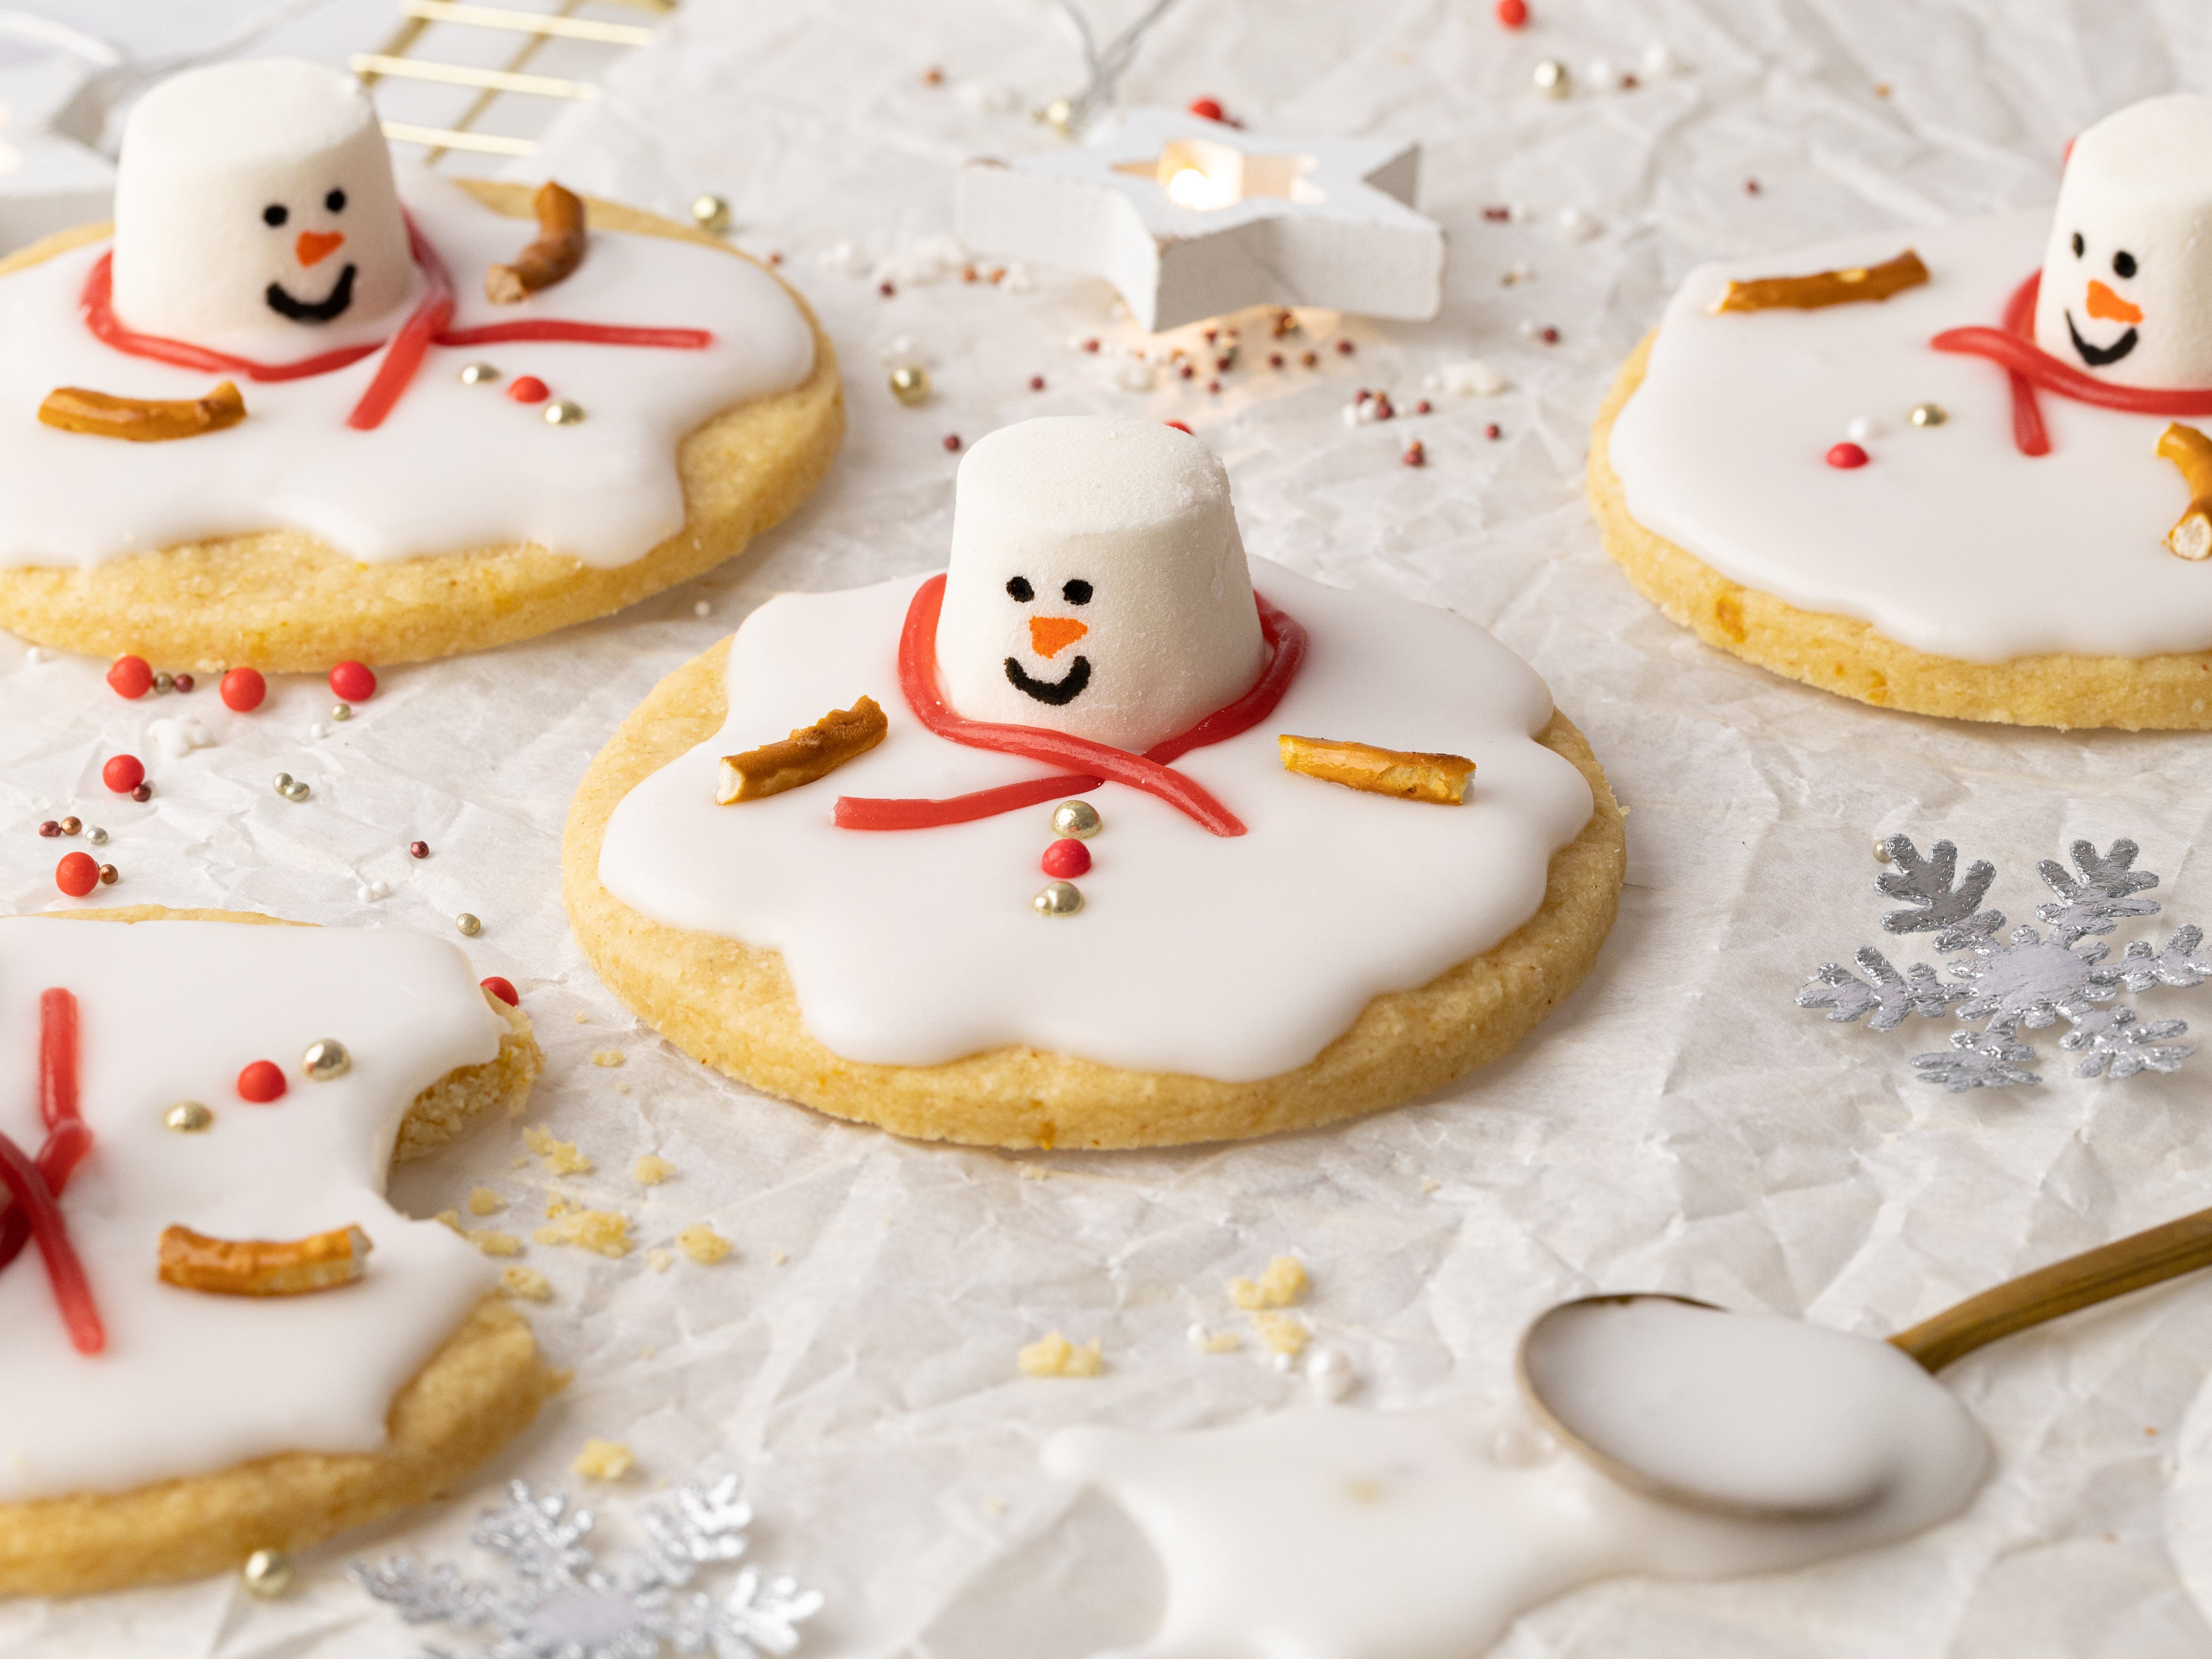 Biscuits topped with marshmallow and icing decorated like a snowman